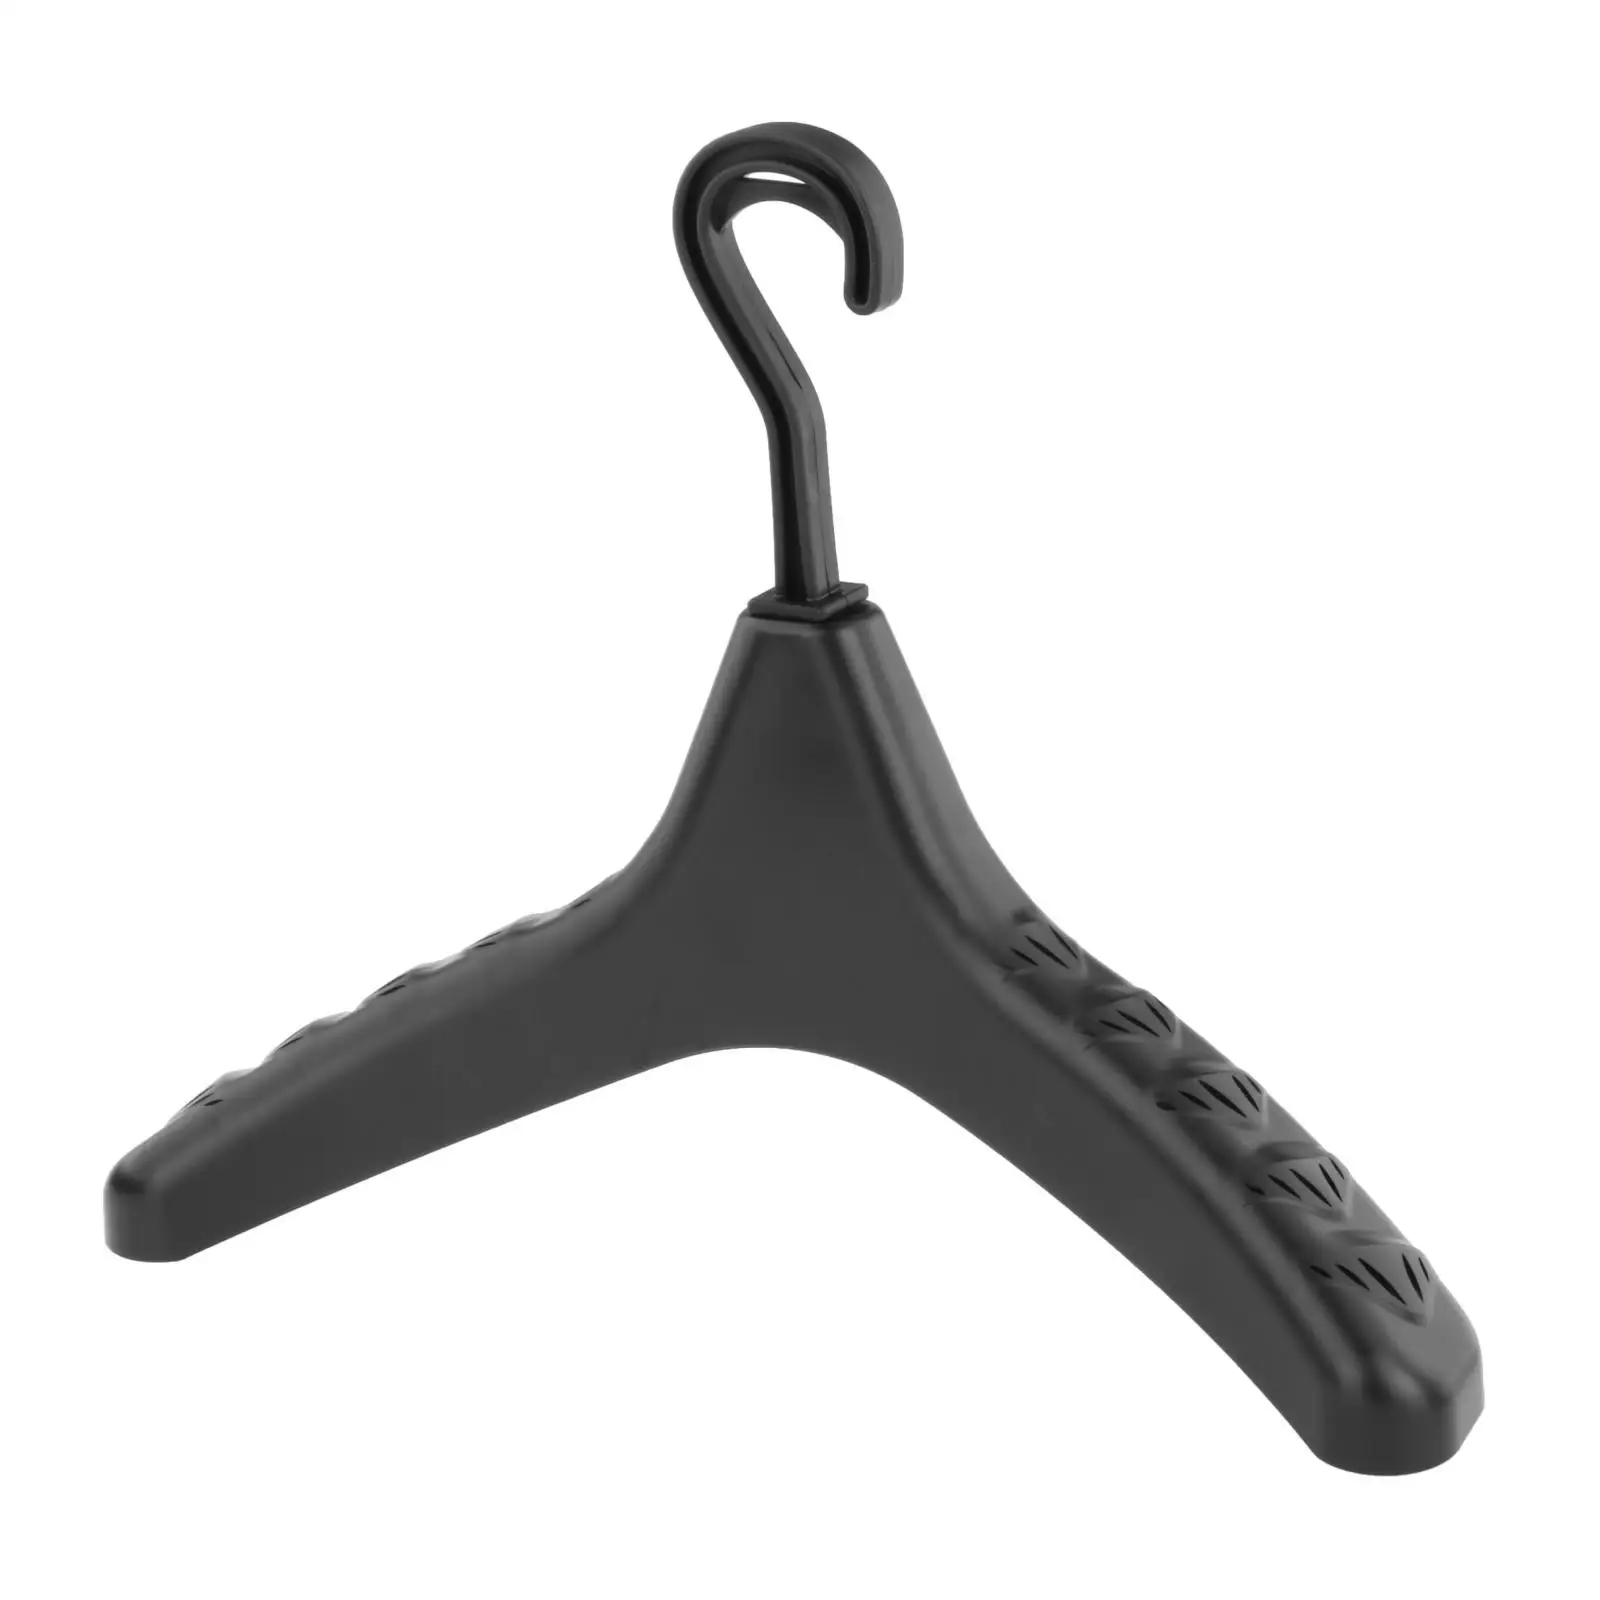 Wetsuit Hanger, Fast Dry Vented Multi-Purpose Hangers for Surfing Scuba Diving Wet Suits